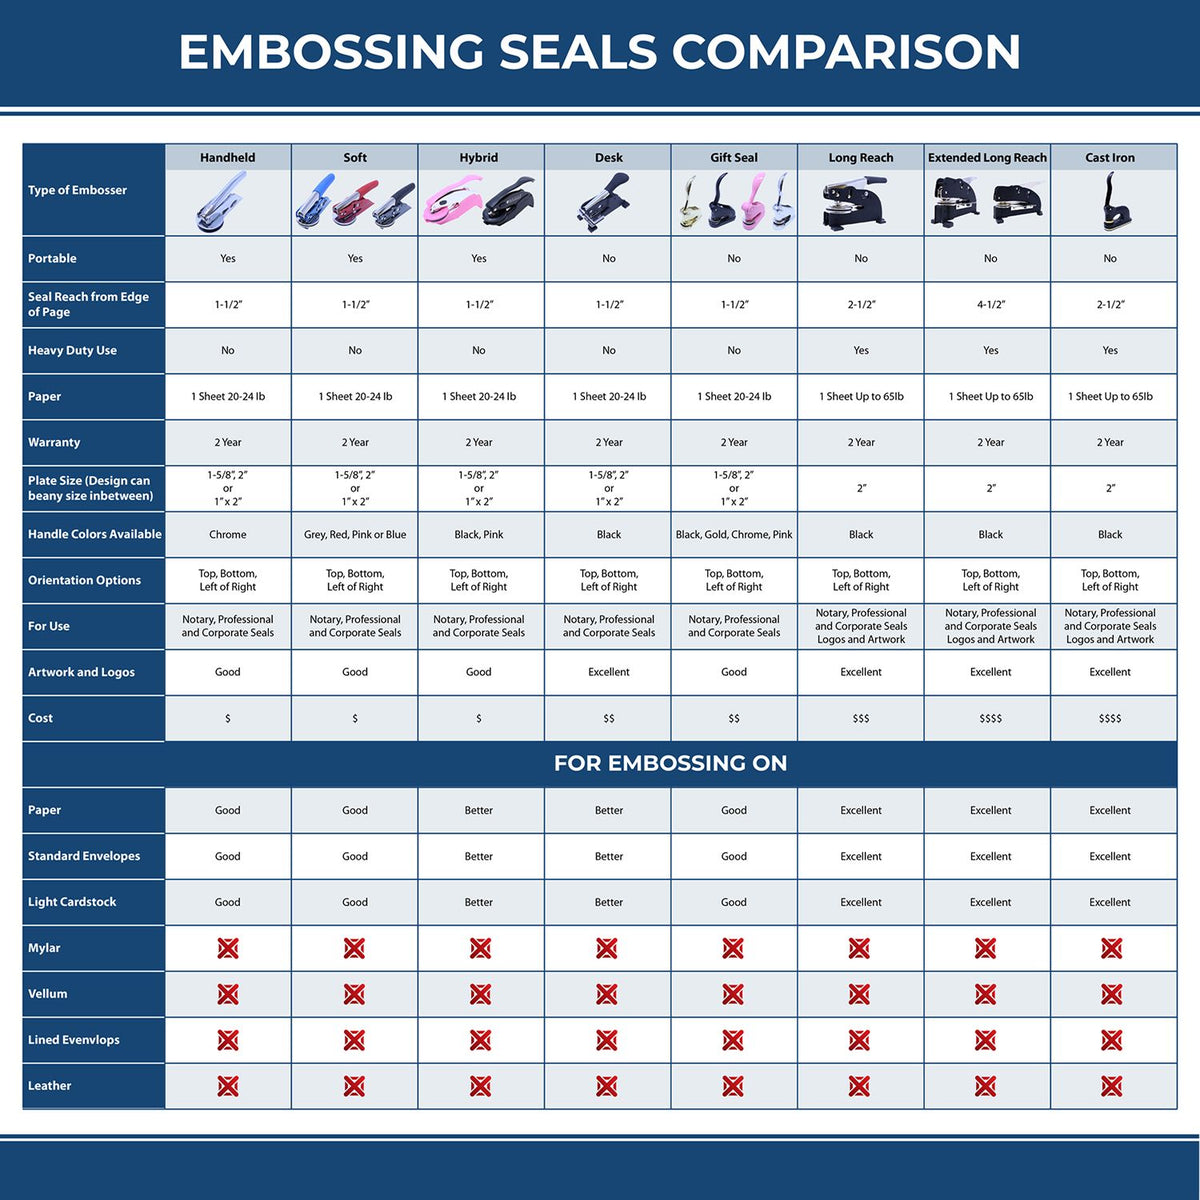 A comparison chart for the different types of mount models available for the Handheld Virginia Architect Seal Embosser.